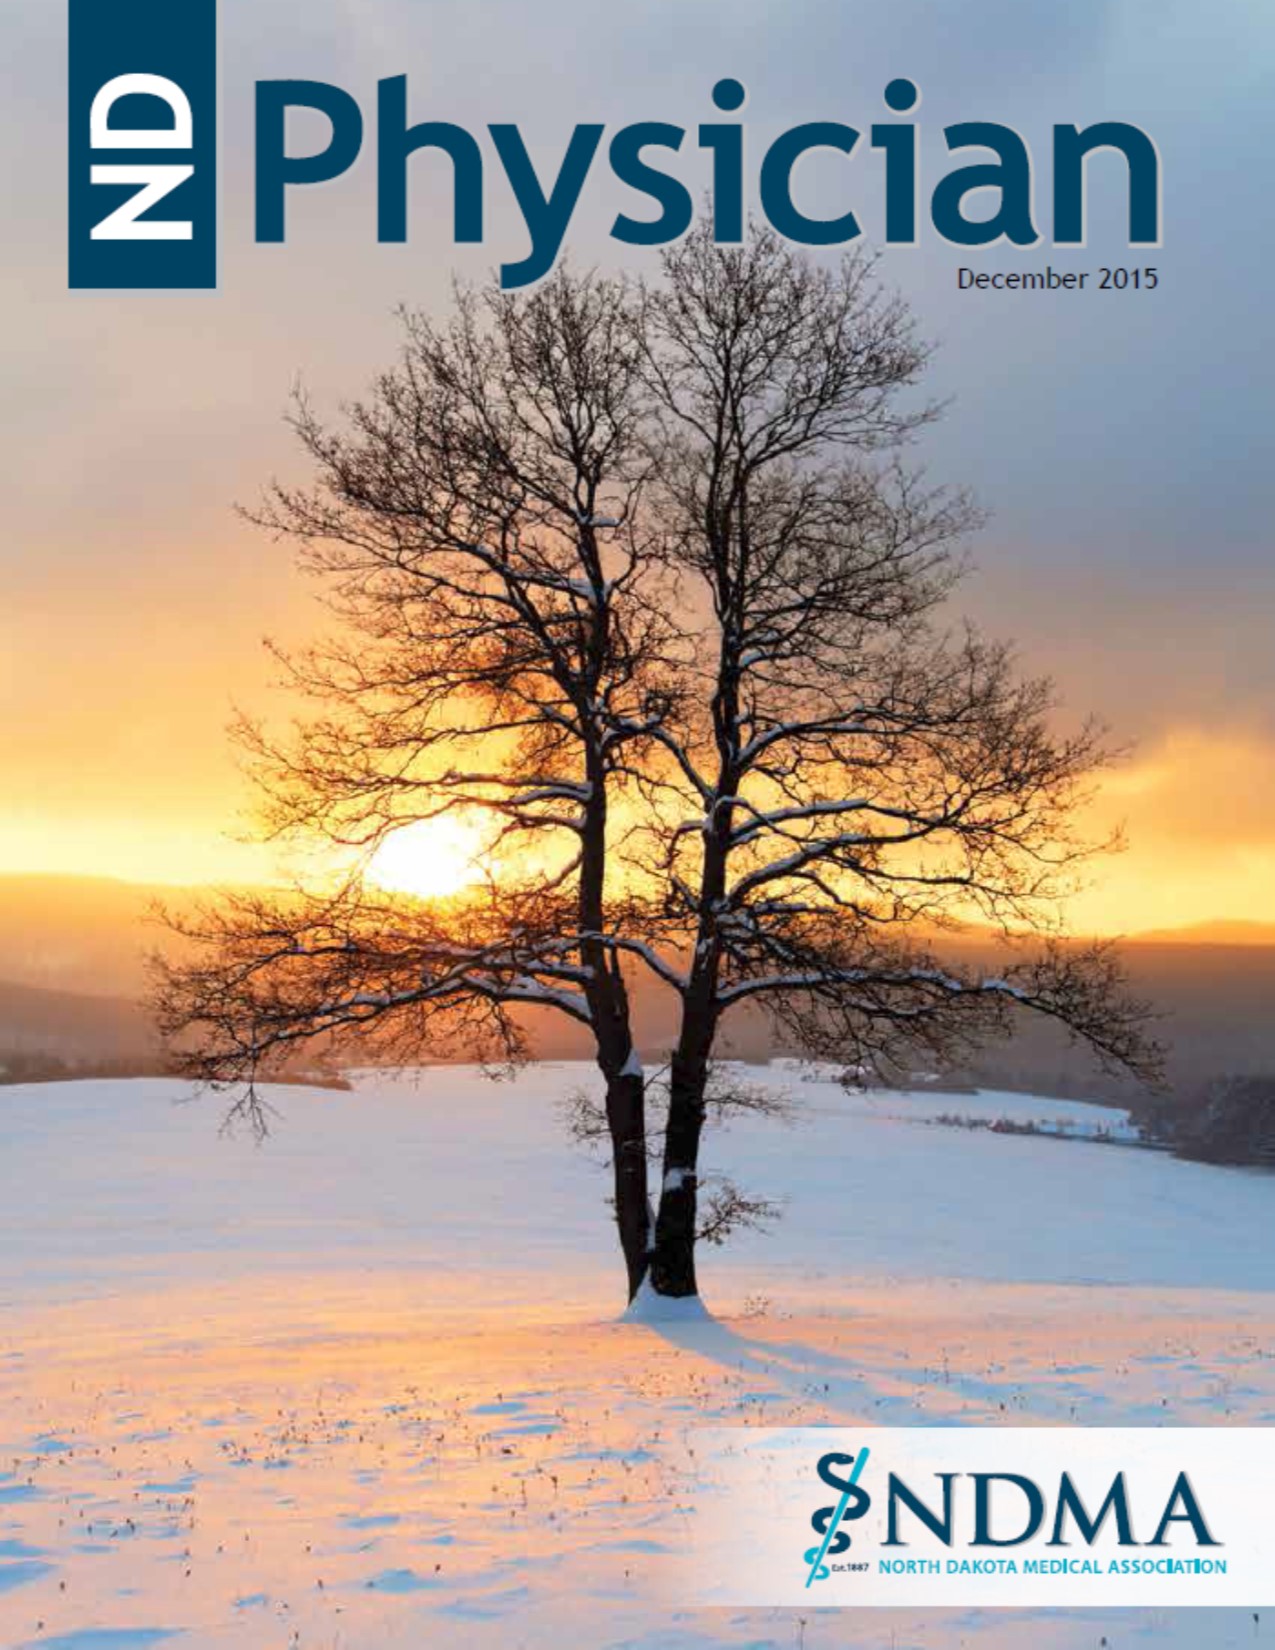 ND Physician December 2015 magazine cover